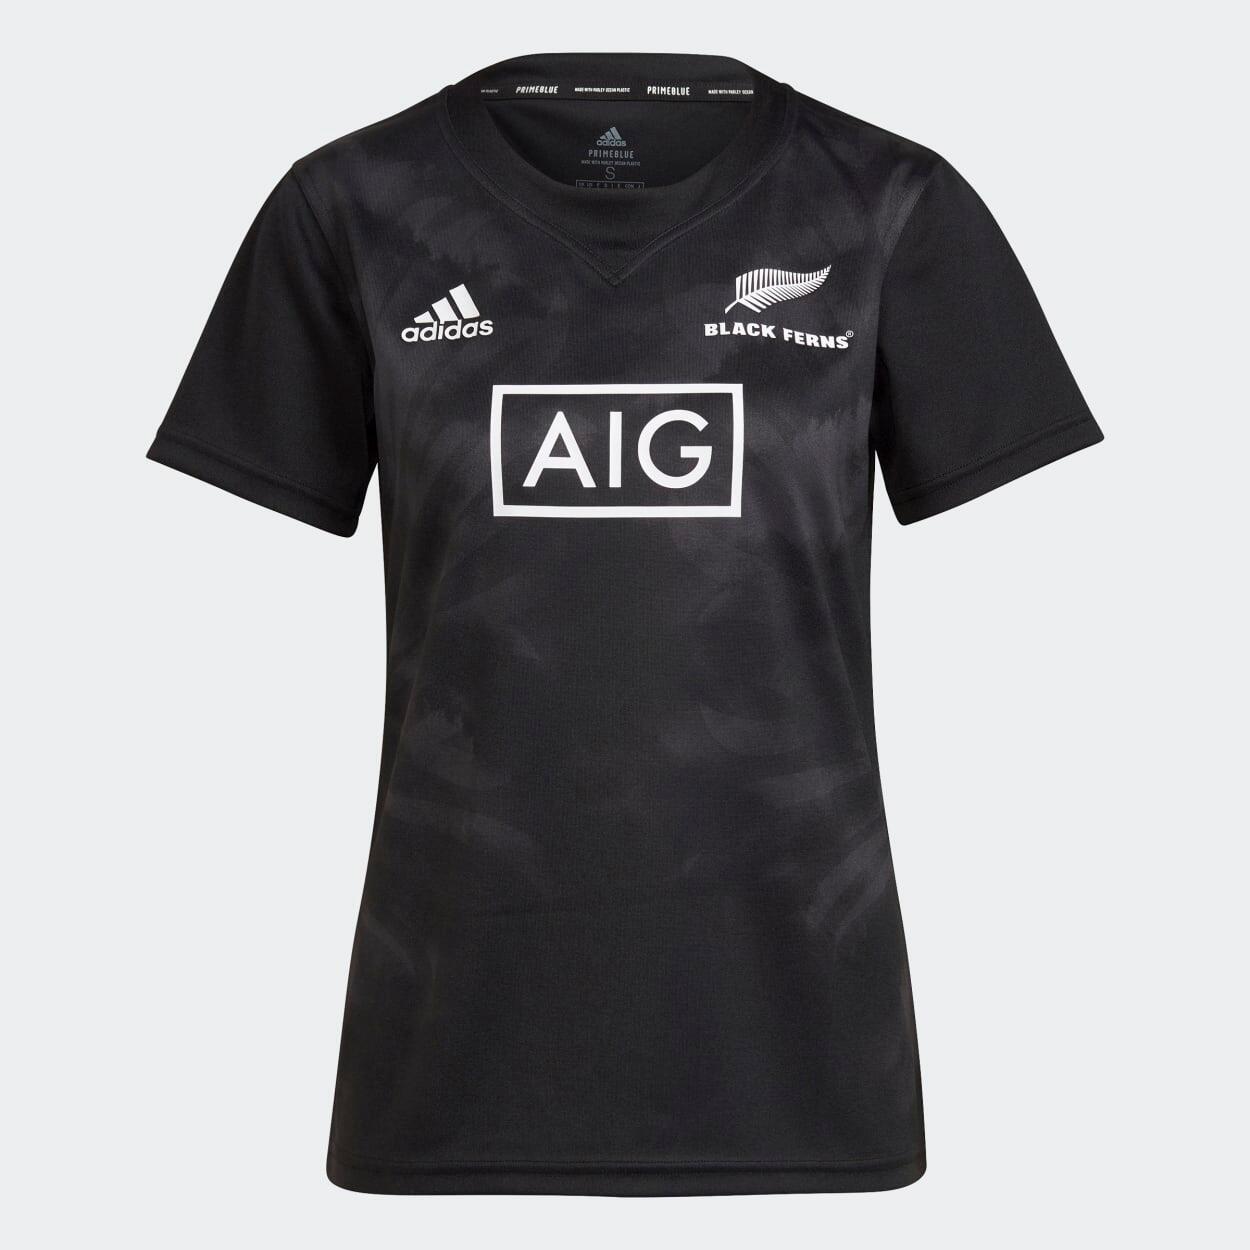 ADIDAS adidas Womens New Zealand Black Ferns Rugby Primeblue Supporters Home Rugby Shir